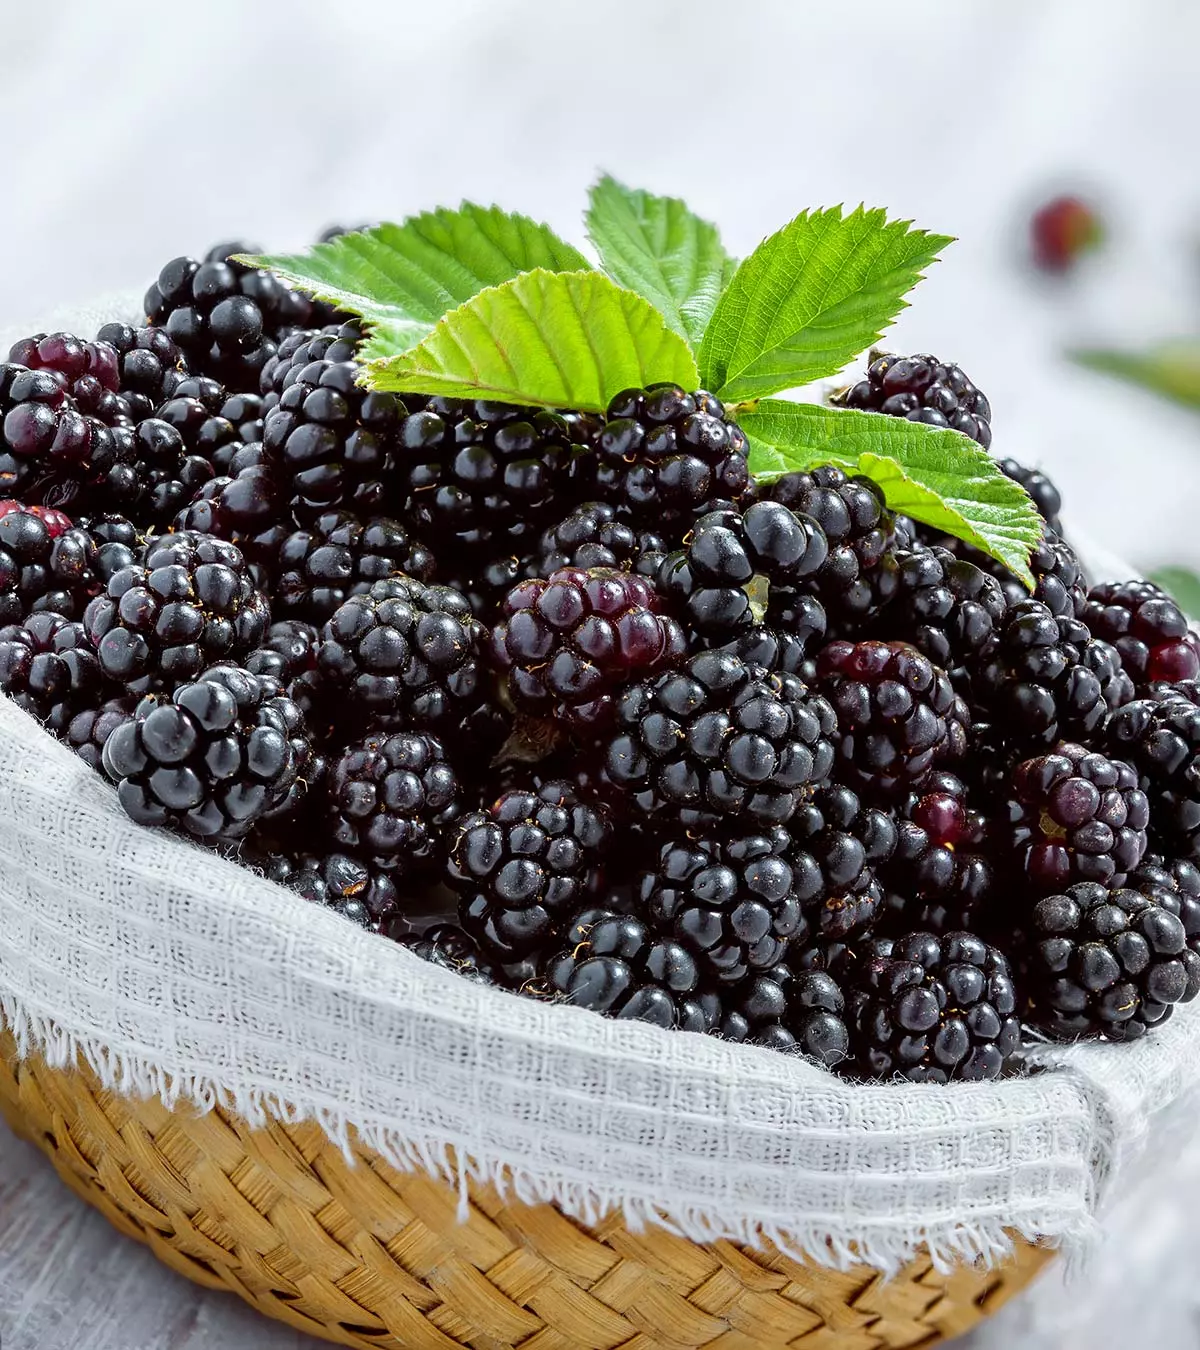 Can You Eat Blackberries While Pregnant?